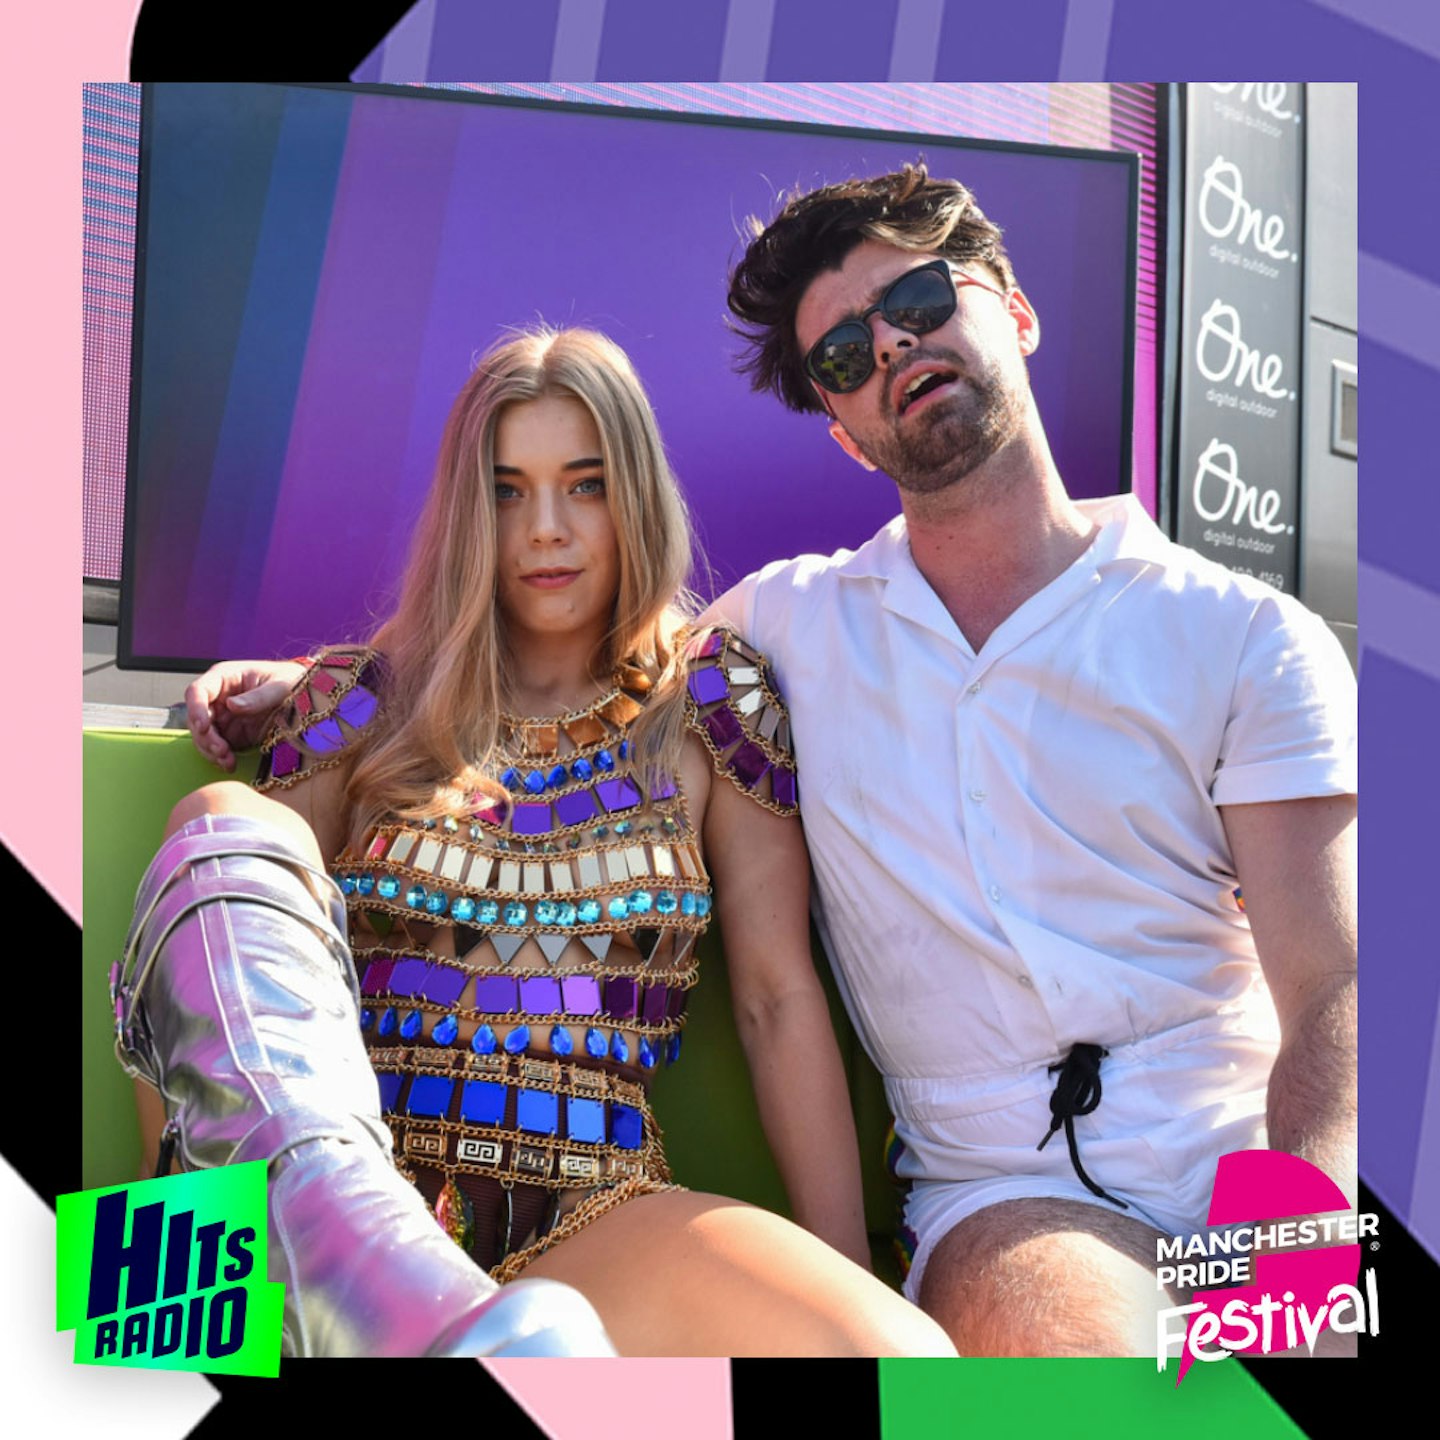 Becky Hill and Jordan Lee backstage at Manchester Pride 2019